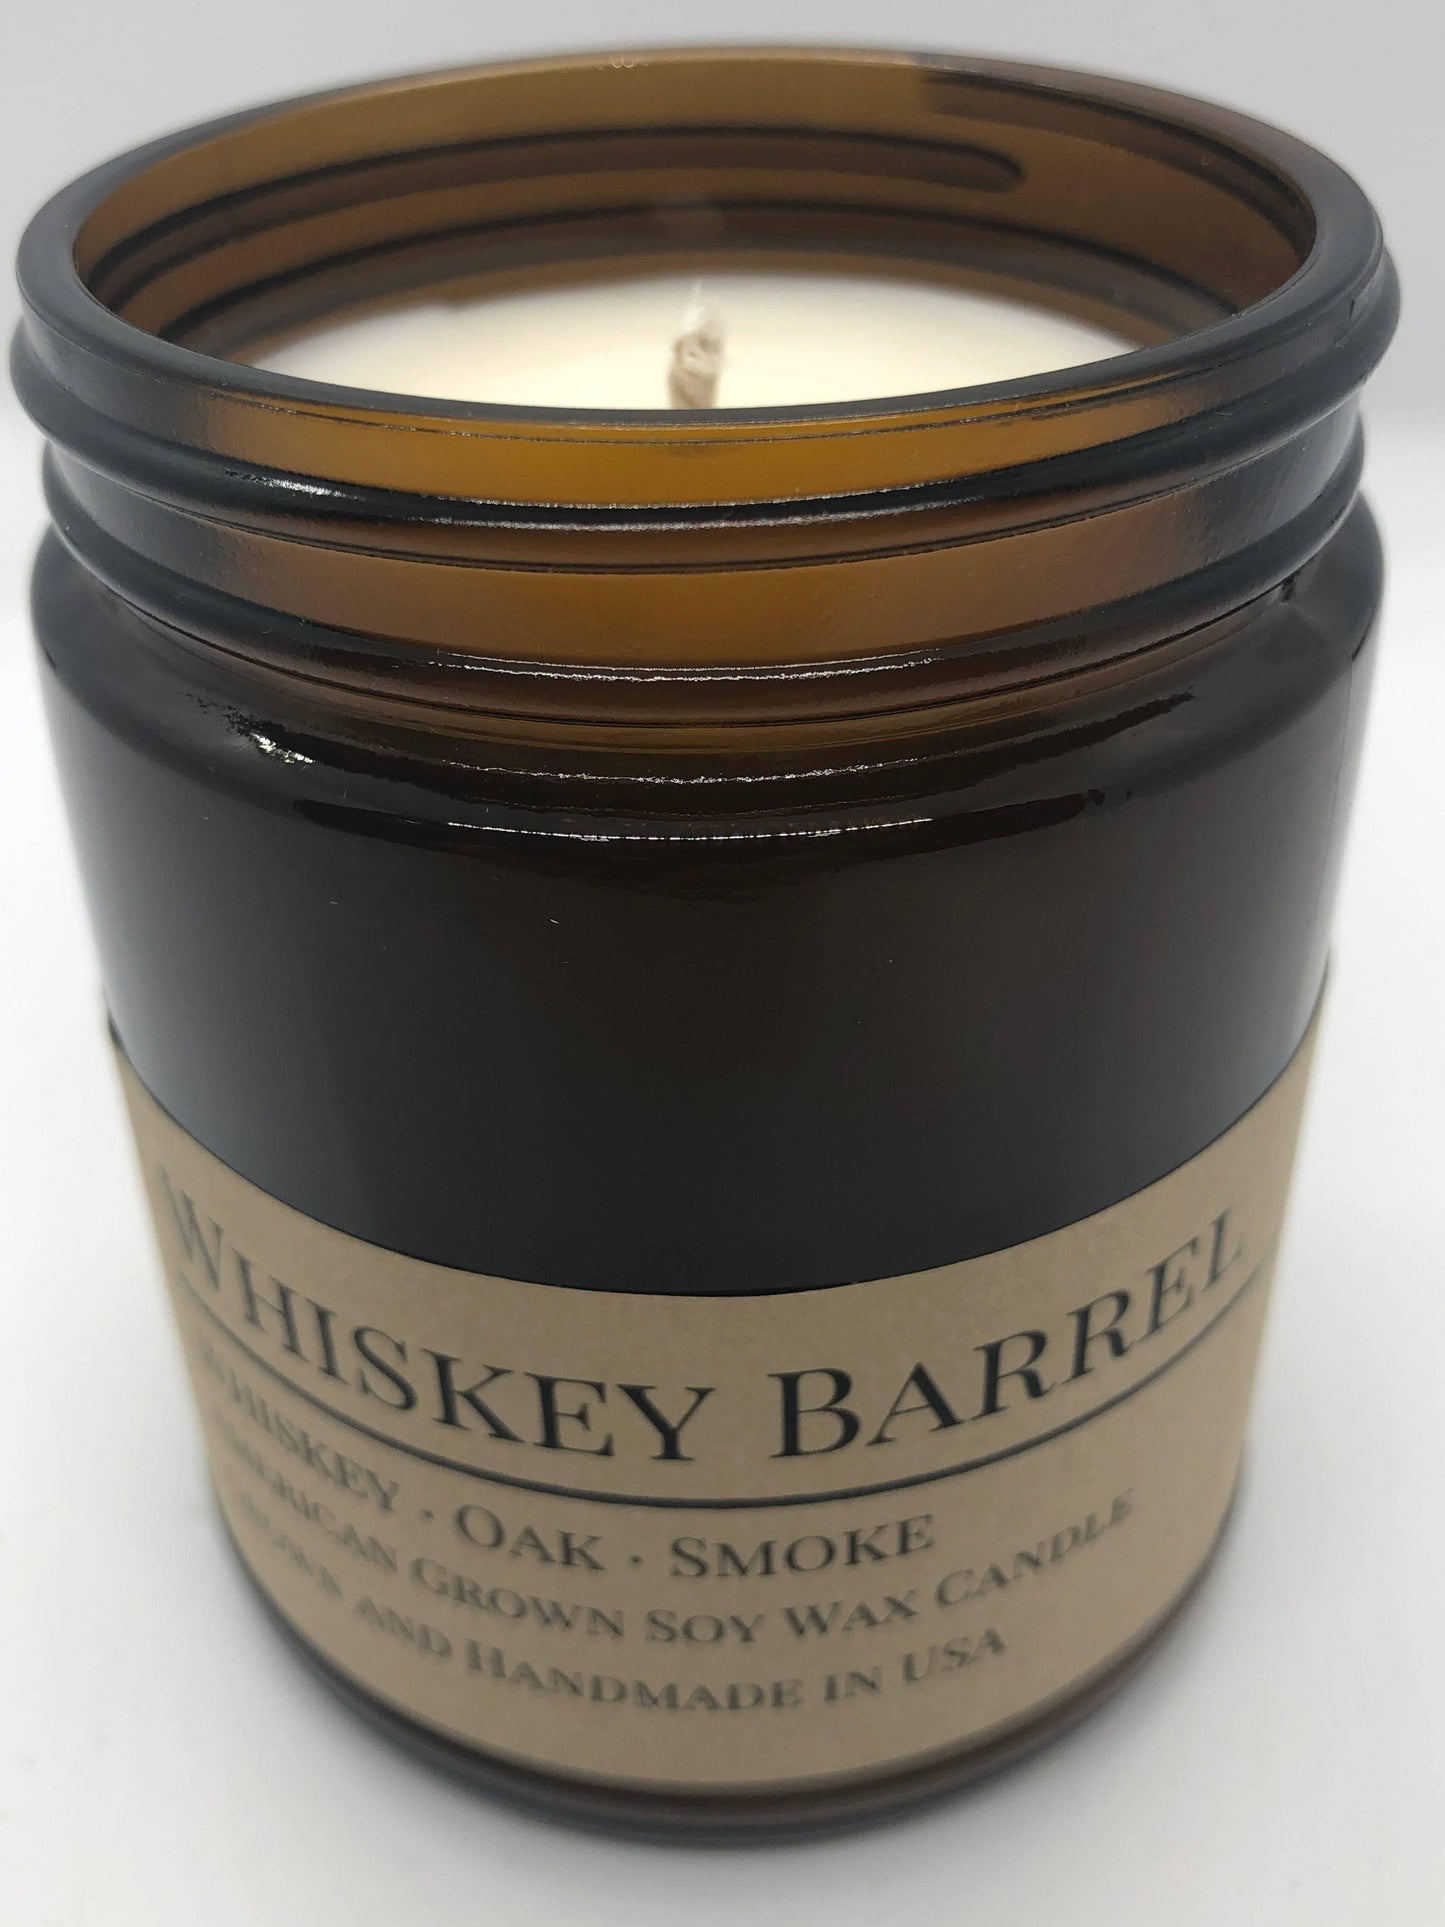 whiskey barrel soy wax candle | 9 oz amber apothecary jar by prairie fire tallow, candles, and lavender